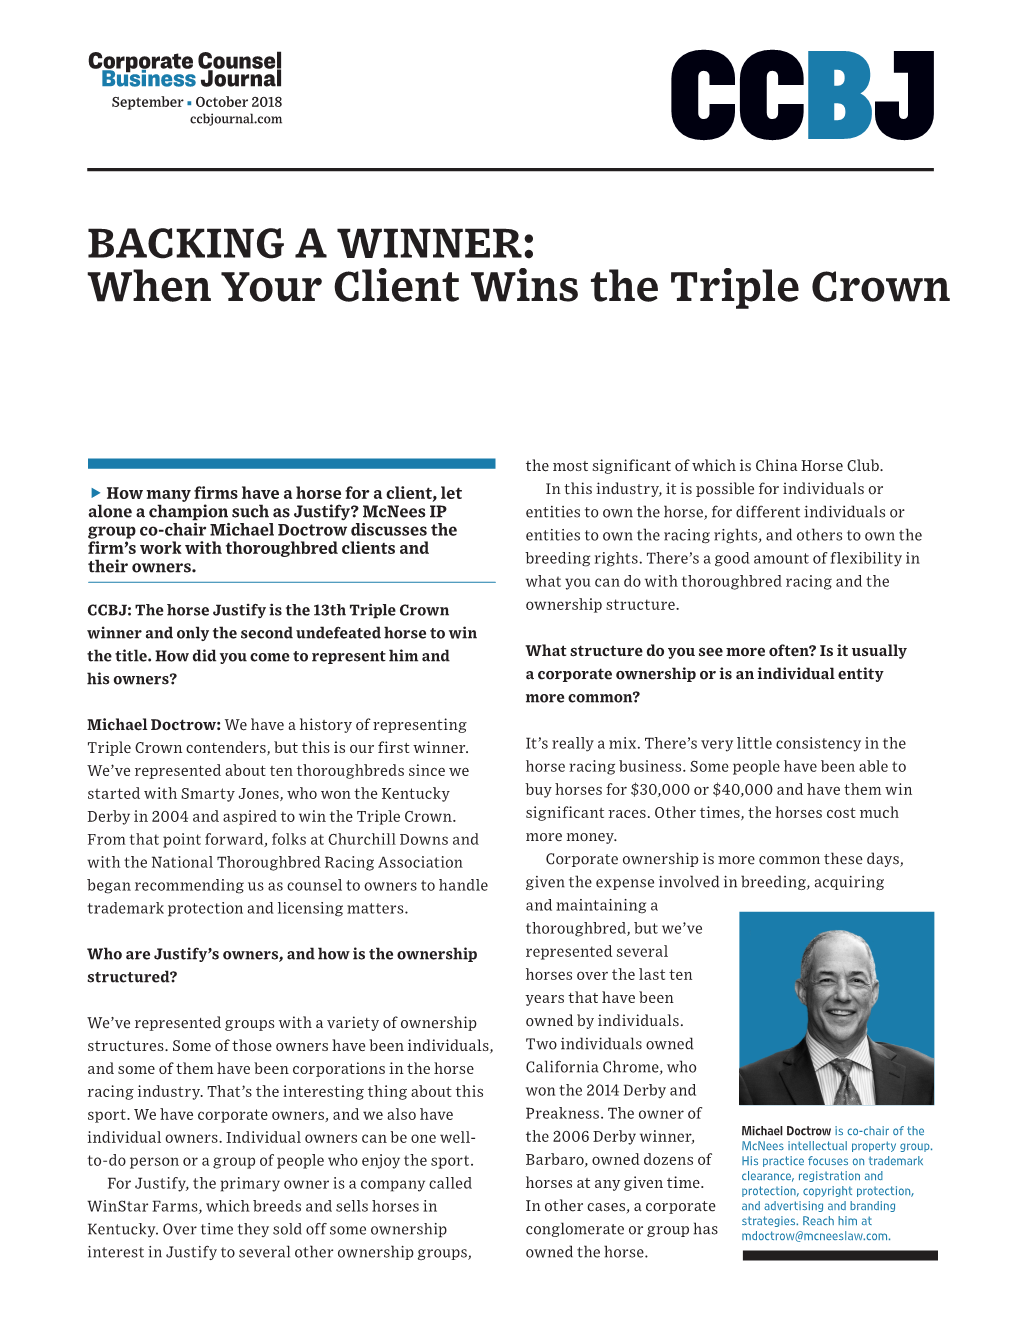 BACKING a WINNER: When Your Client Wins the Triple Crown